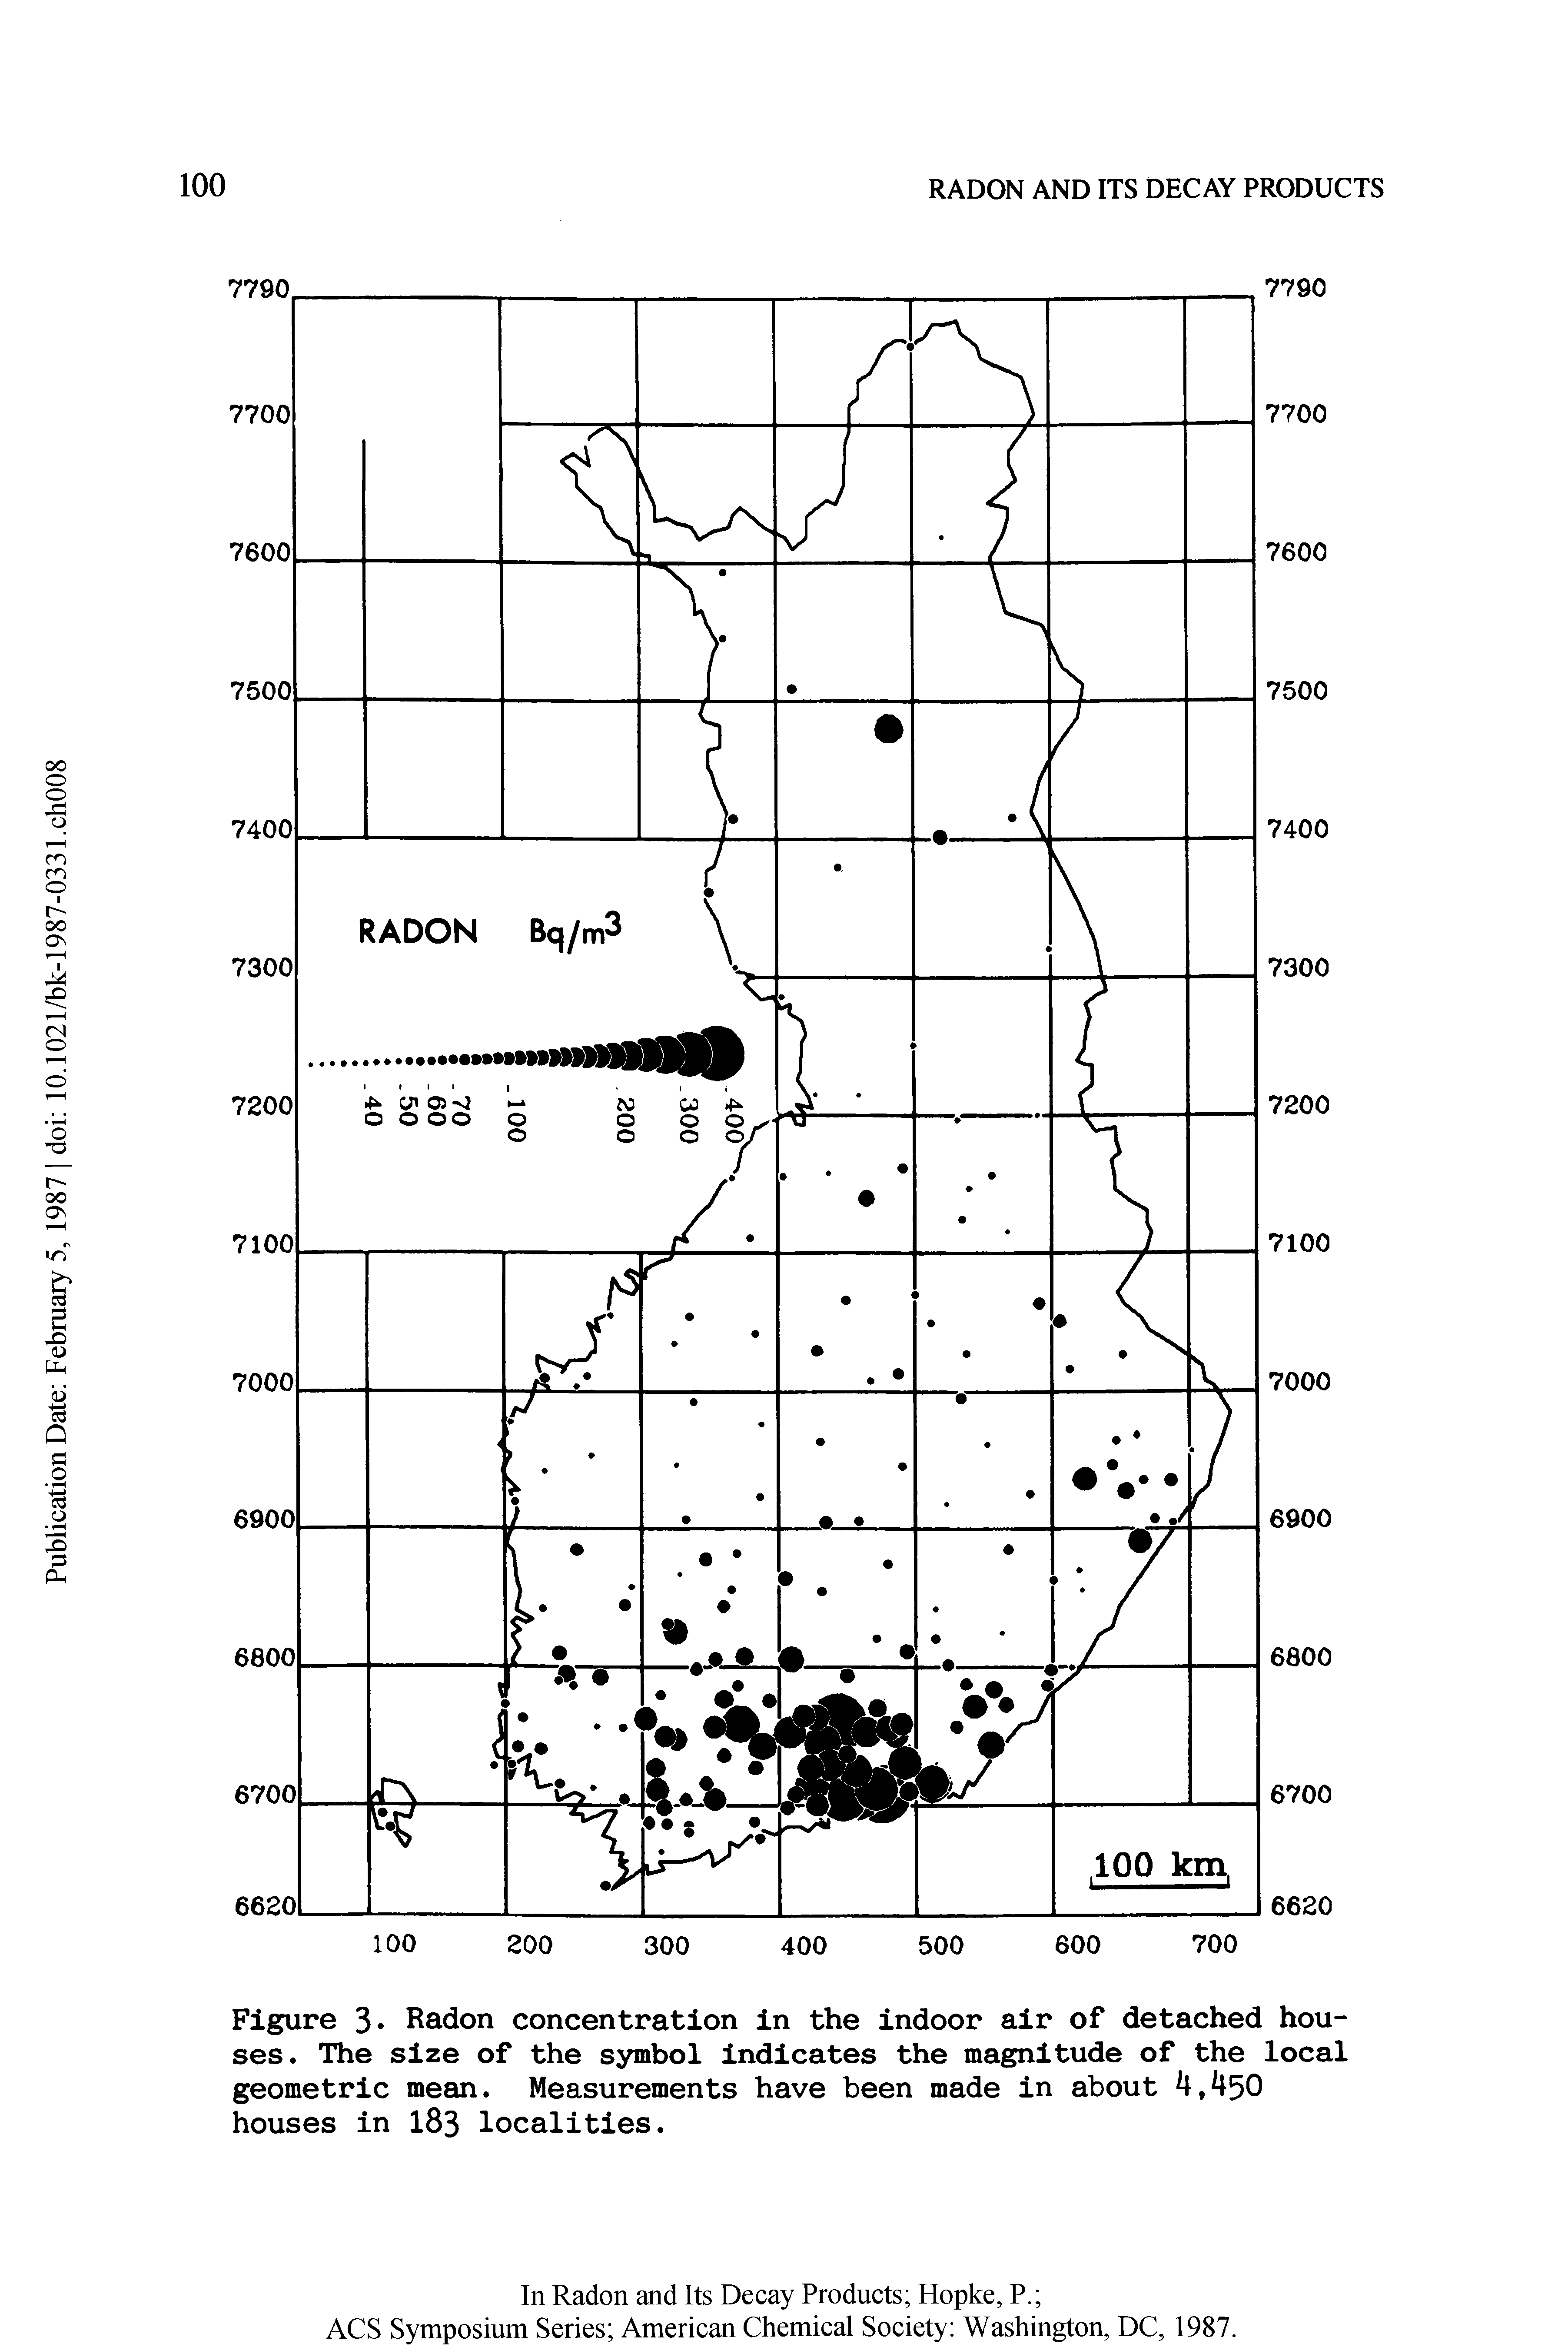 Figure 3 Radon concentration in the indoor air of detached houses. The size of the symbol indicates the magnitude of the local geometric mean. Measurements have been made in about 4,450 houses in 183 localities.